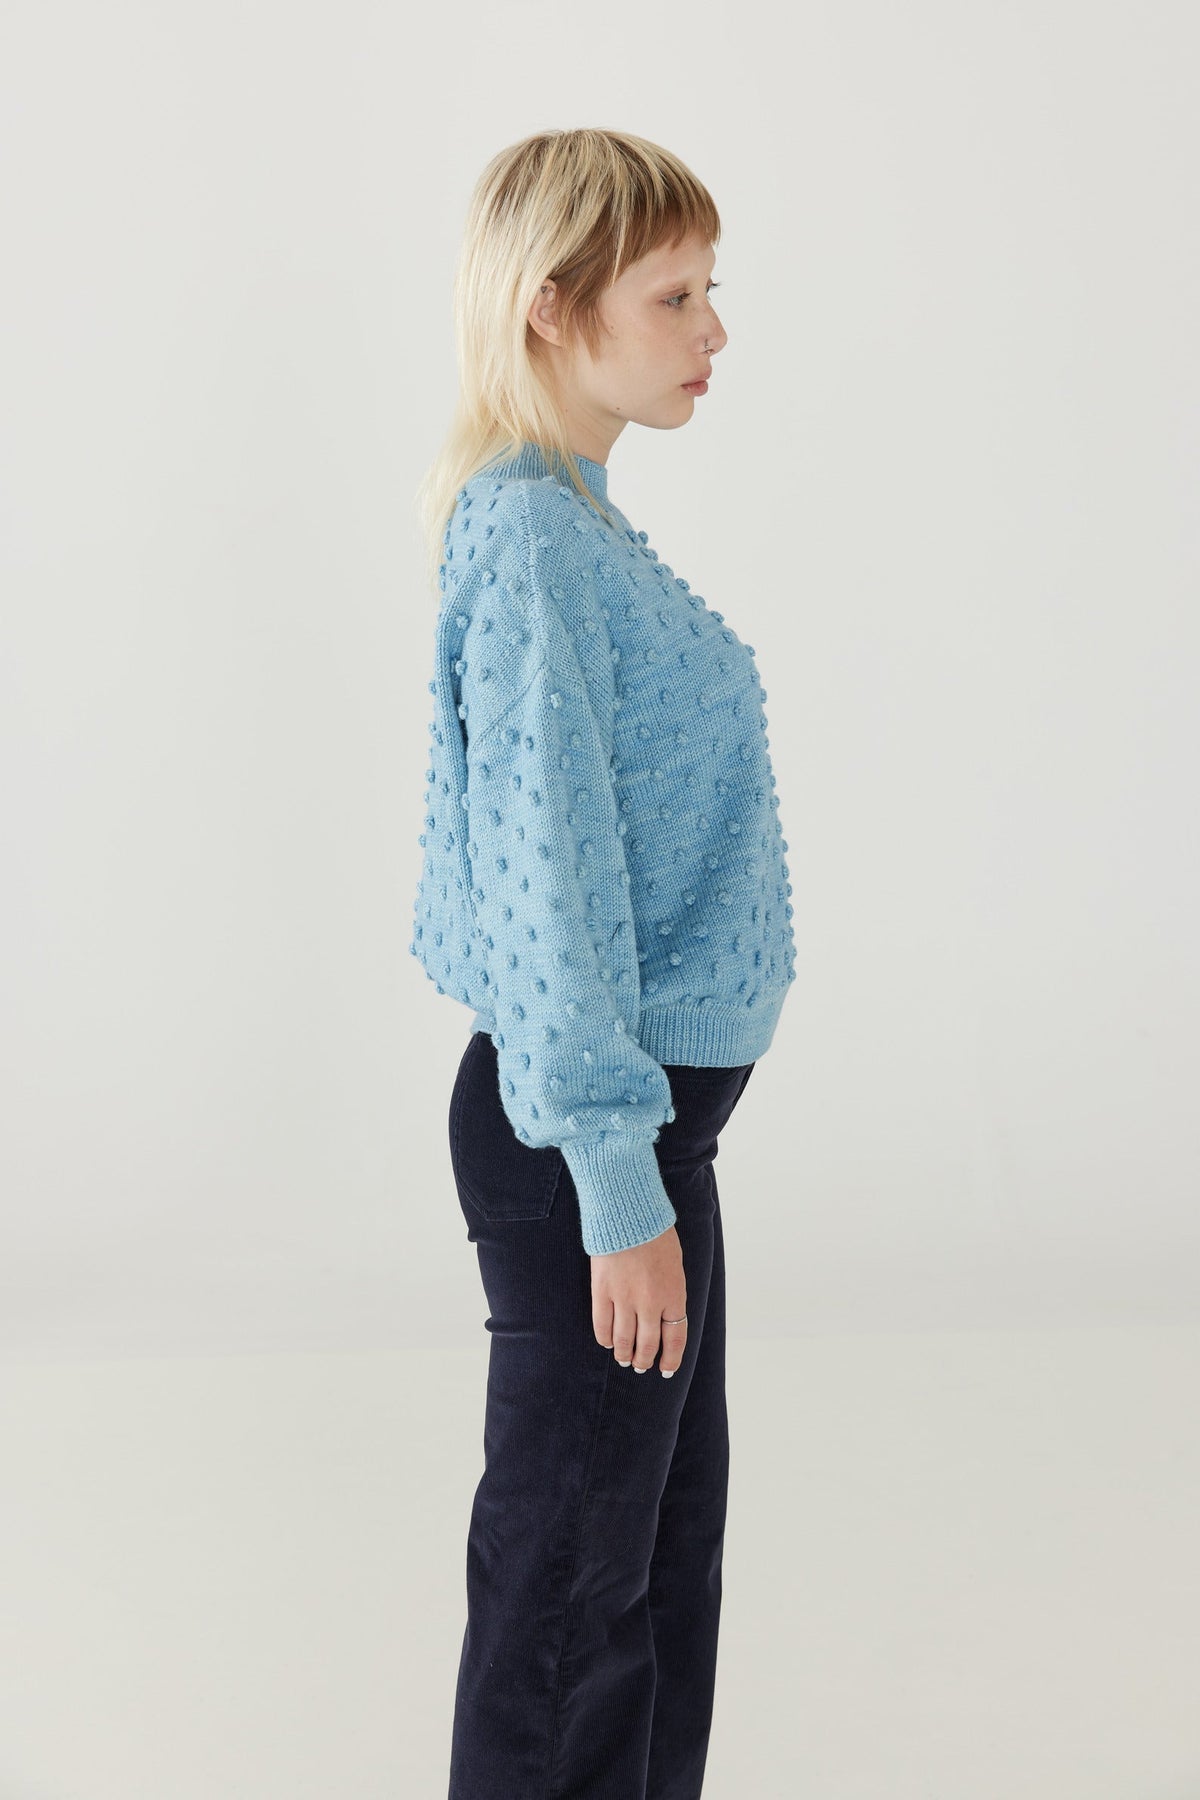 Adult Popcorn Sweater - Faded Denim+Model is 5&#39;7&quot; | 34&quot; Bust | 26.5&quot; Waist | 36.25&quot; Hips | size 4, wearing a size Small